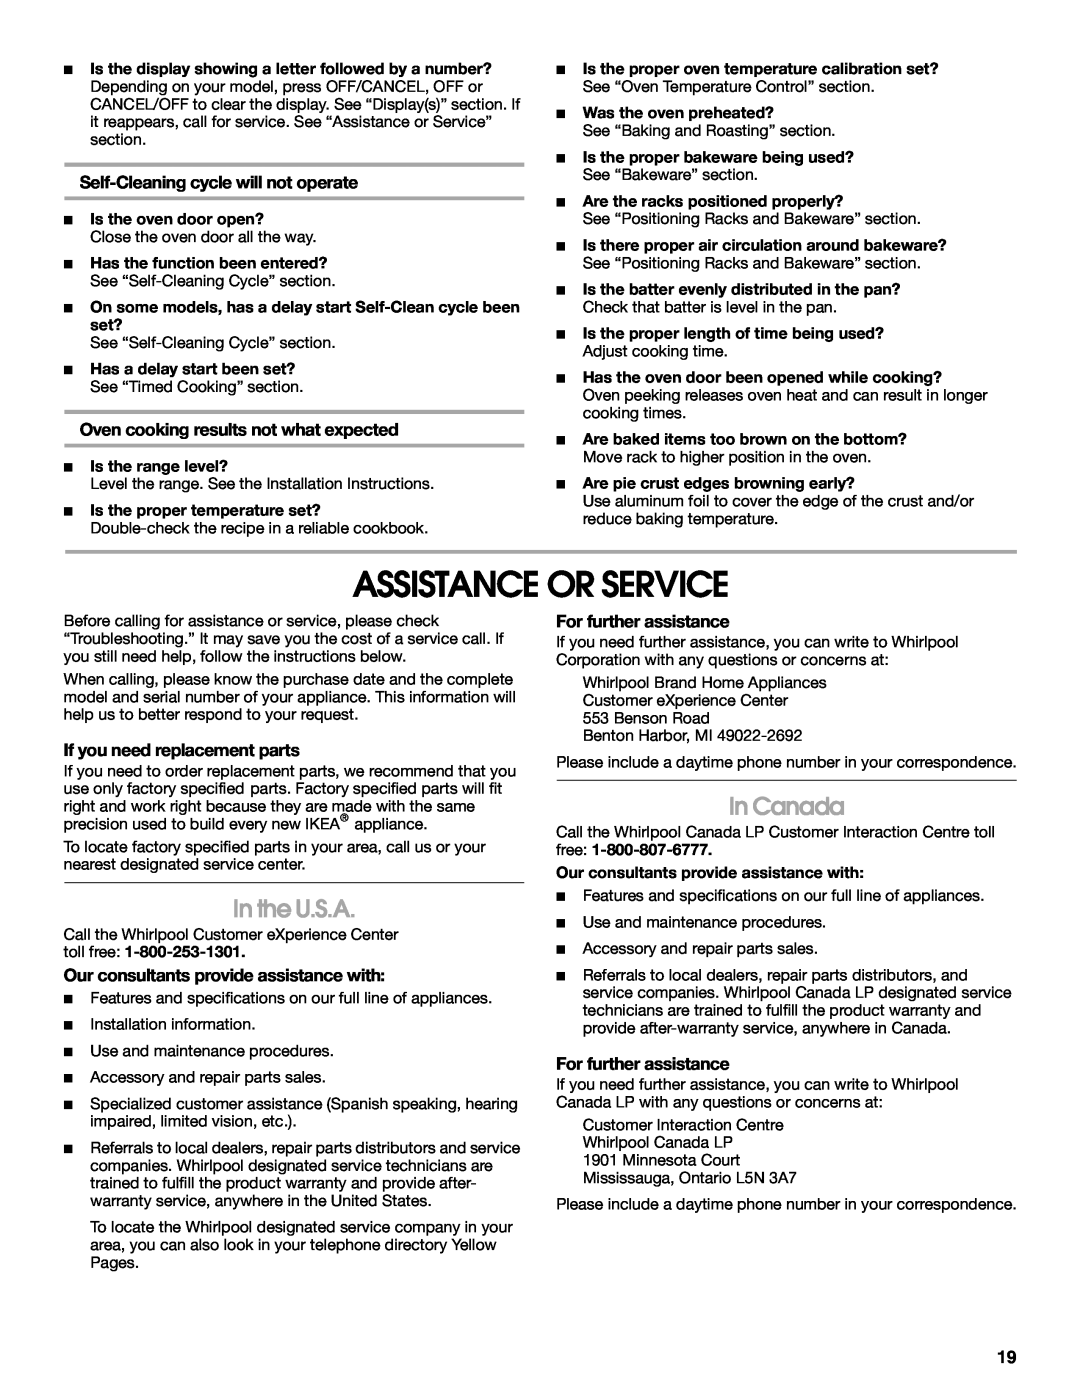 Whirlpool W10017750B2 manual Assistance Or Service, In the U.S.A, In Canada, Self-Cleaningcycle will not operate 